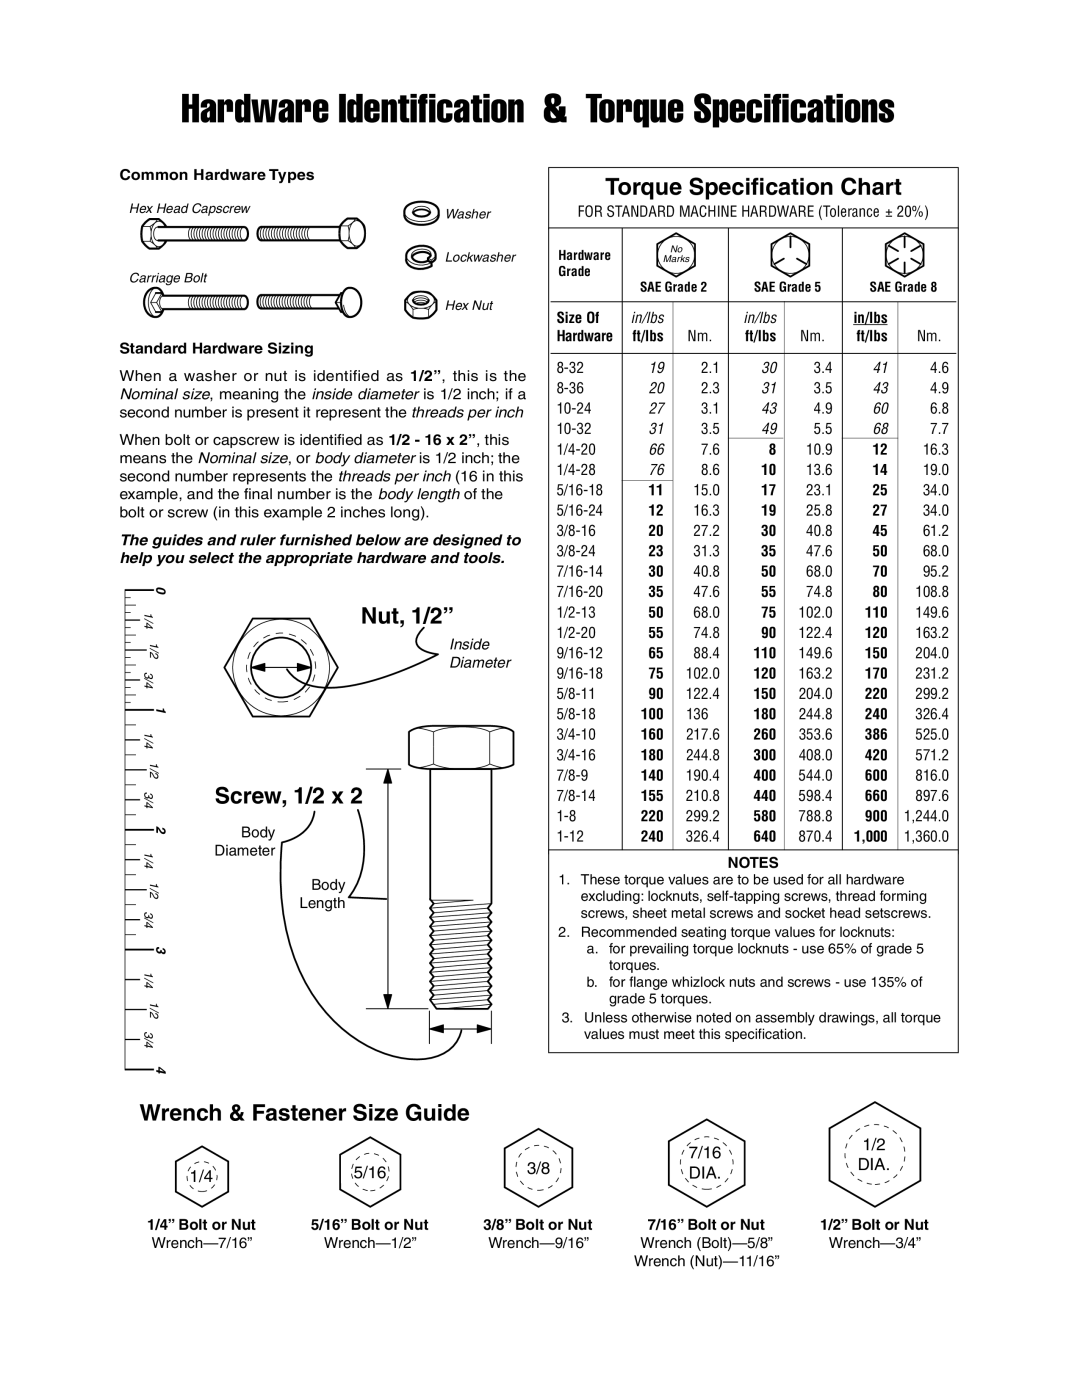 Snapper 1694543 Wrench & Fastener Size Guide, Hardware Identification & Torque Specifications, Torque Specification Chart 